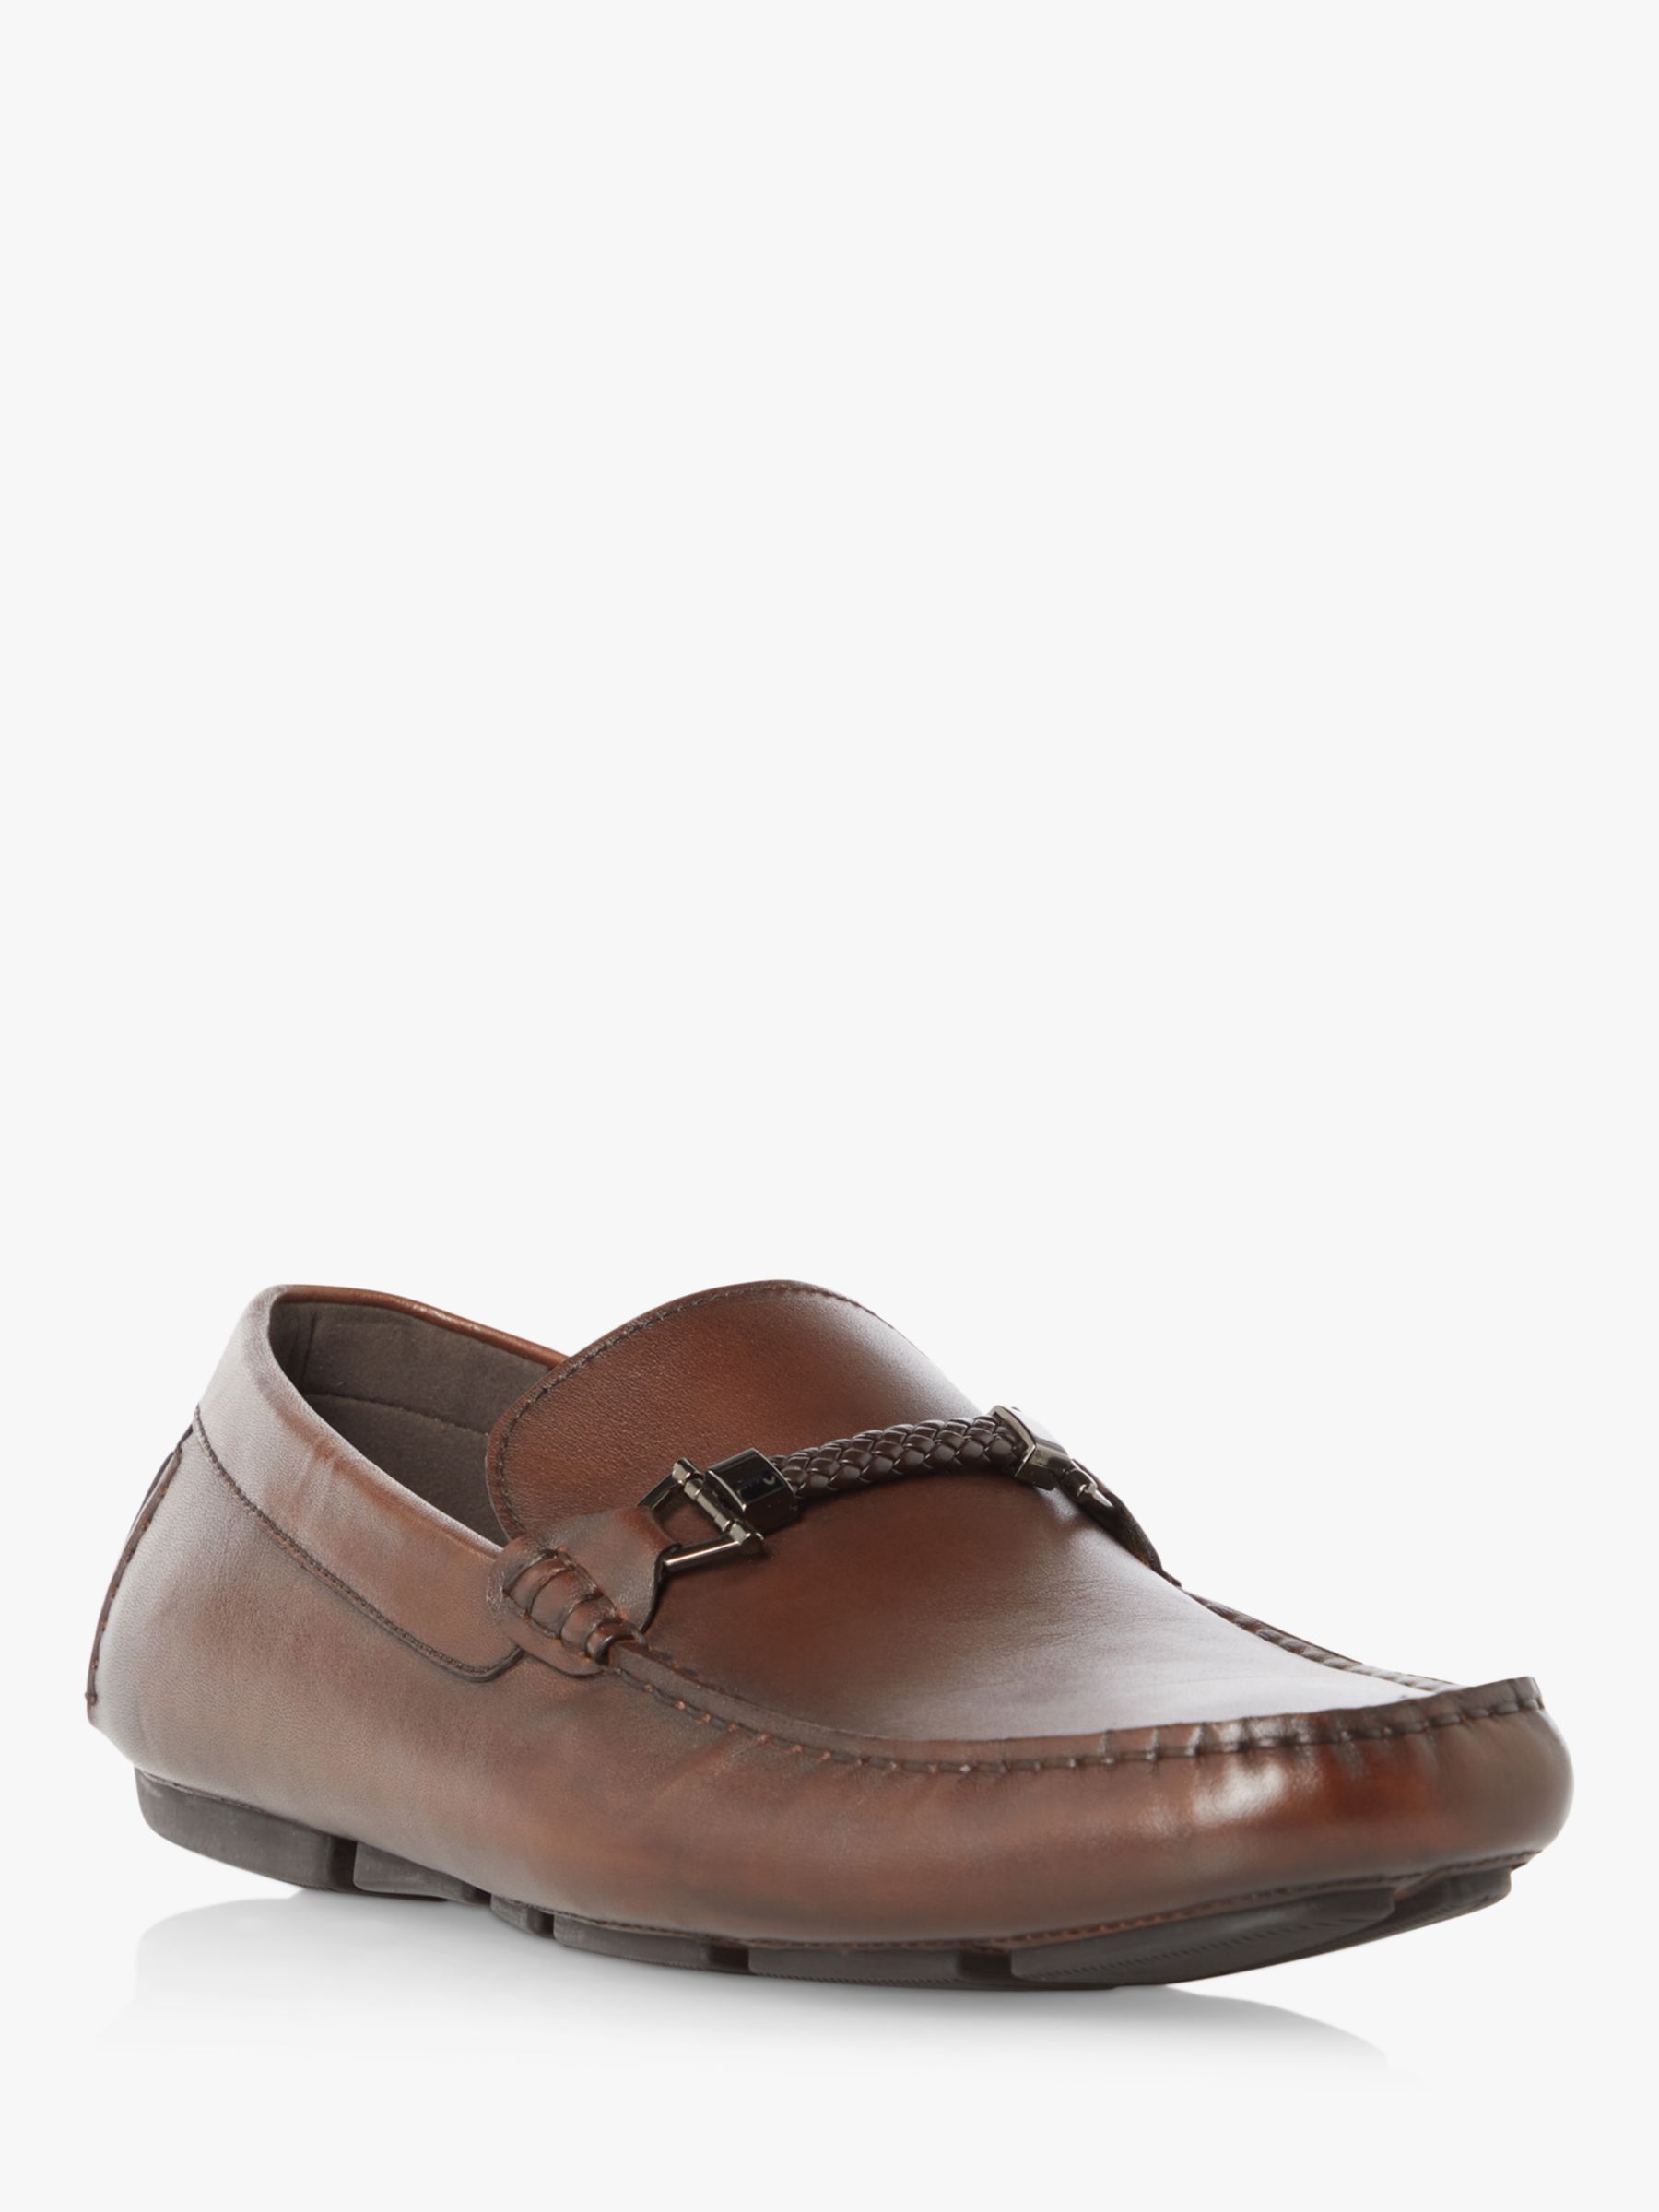 Dune Beacons Leather Loafers, Dark Brown, 6